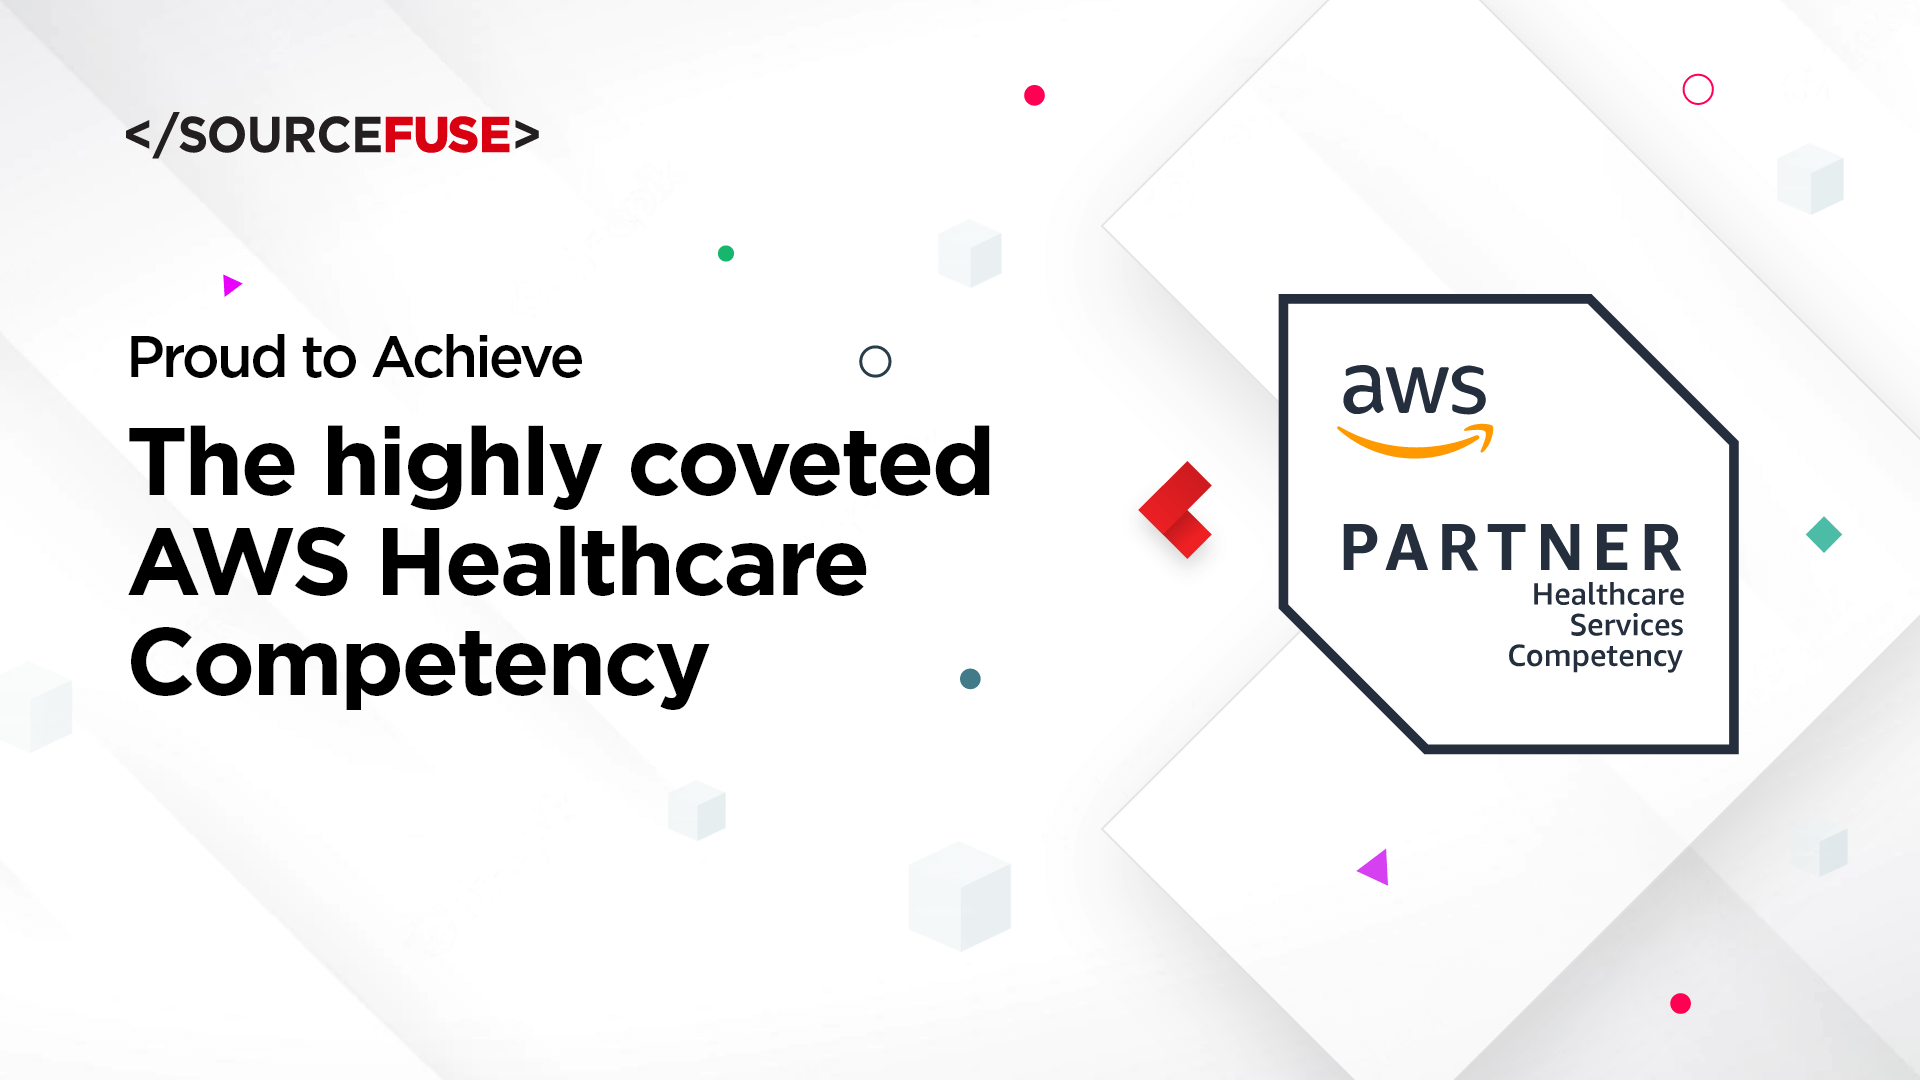 SourceFuse achieves the highly coveted AWS Healthcare Competency